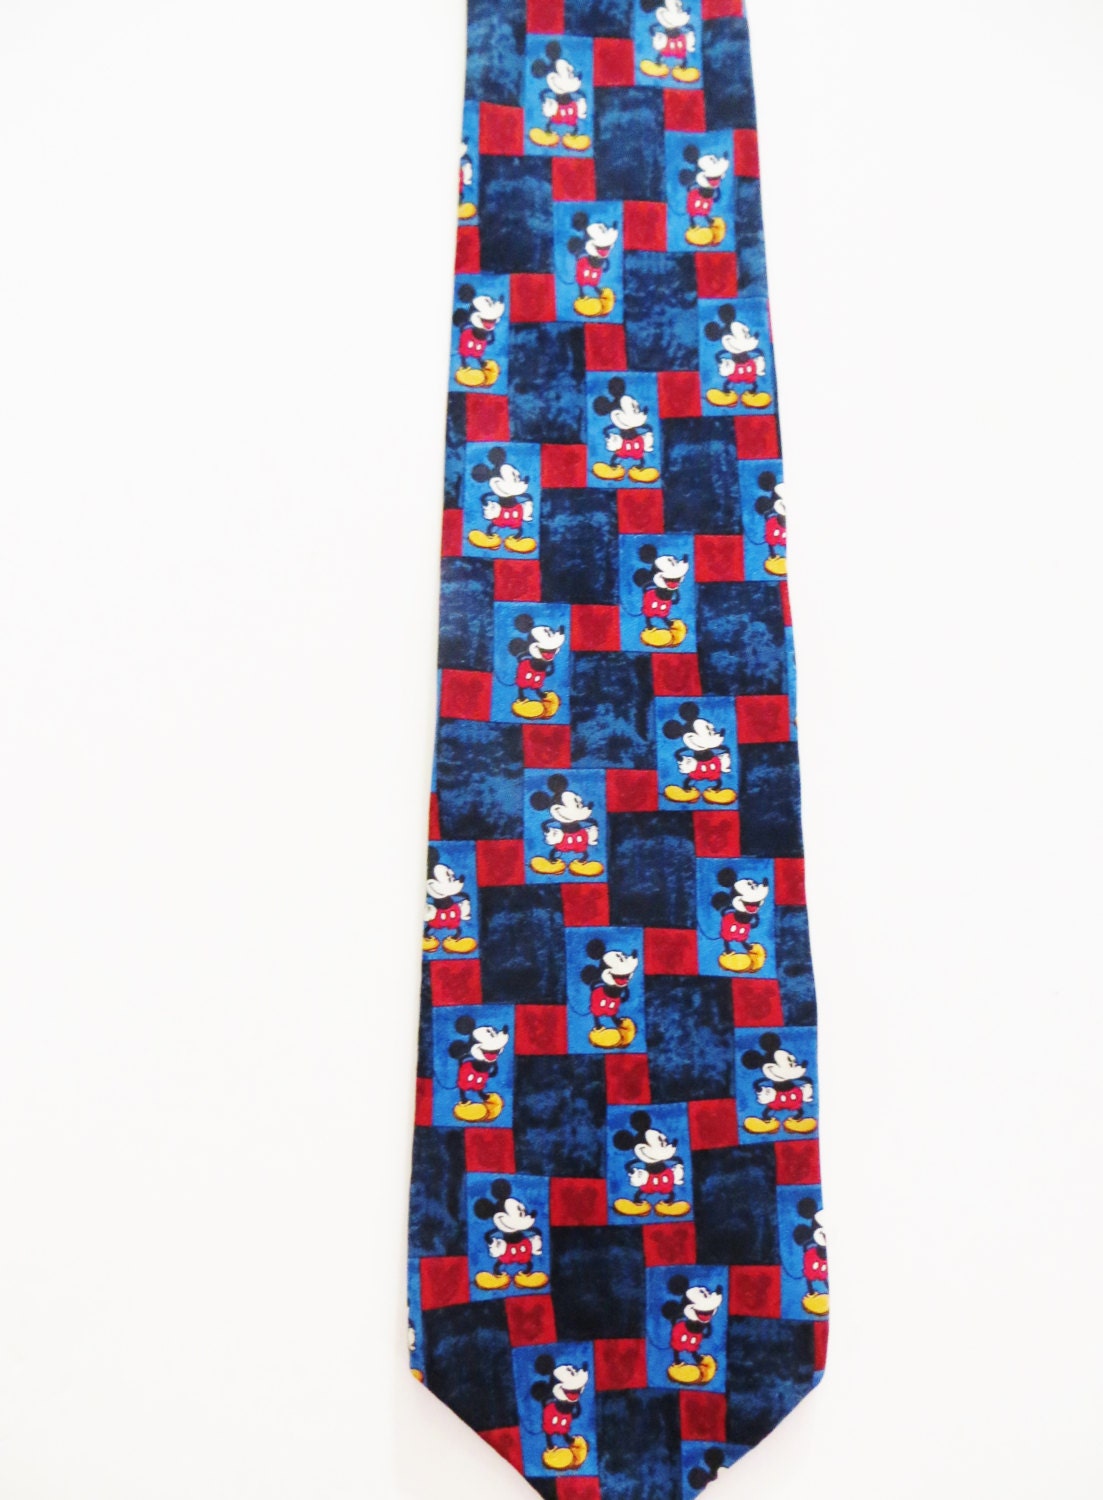 Mickey Mouse Silk Necktie Blue Red Repeat Pattern Disney